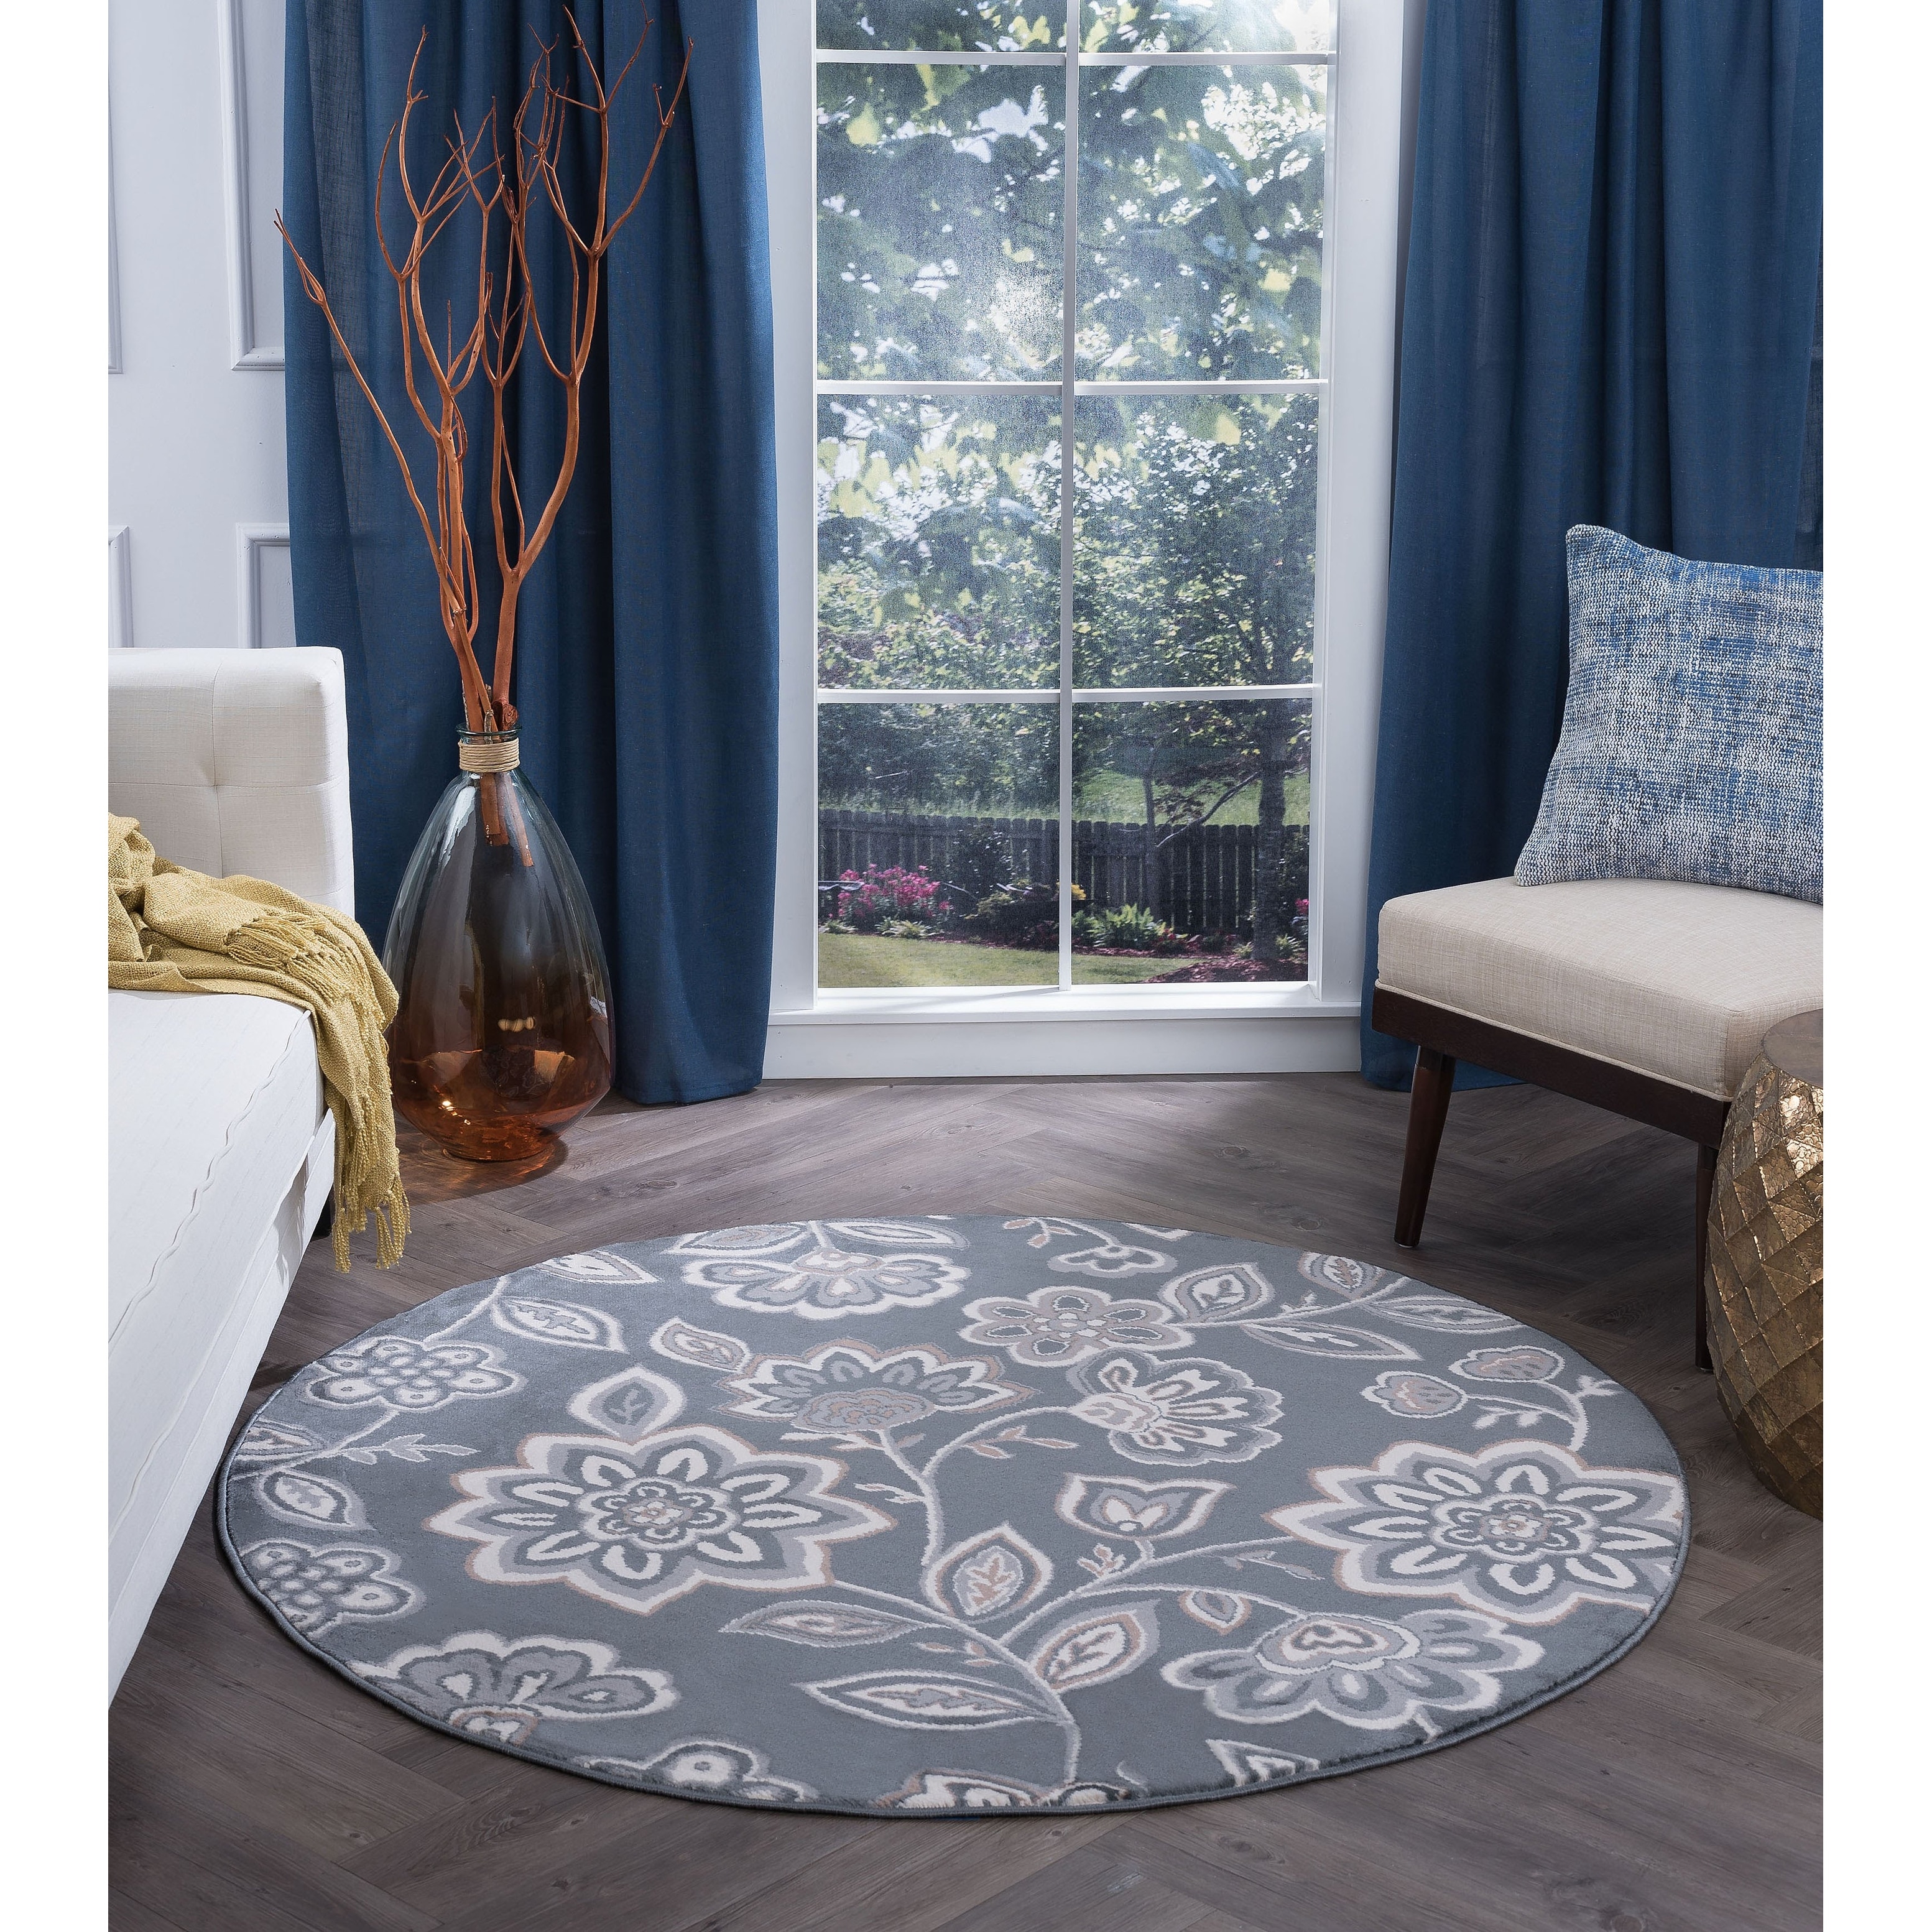 Dining Room Round Bedroom Alise Rugs Carrington Transitional Geometric Area Rug Navy 7'10 x 7'10 8' Round Indoor Living Room 